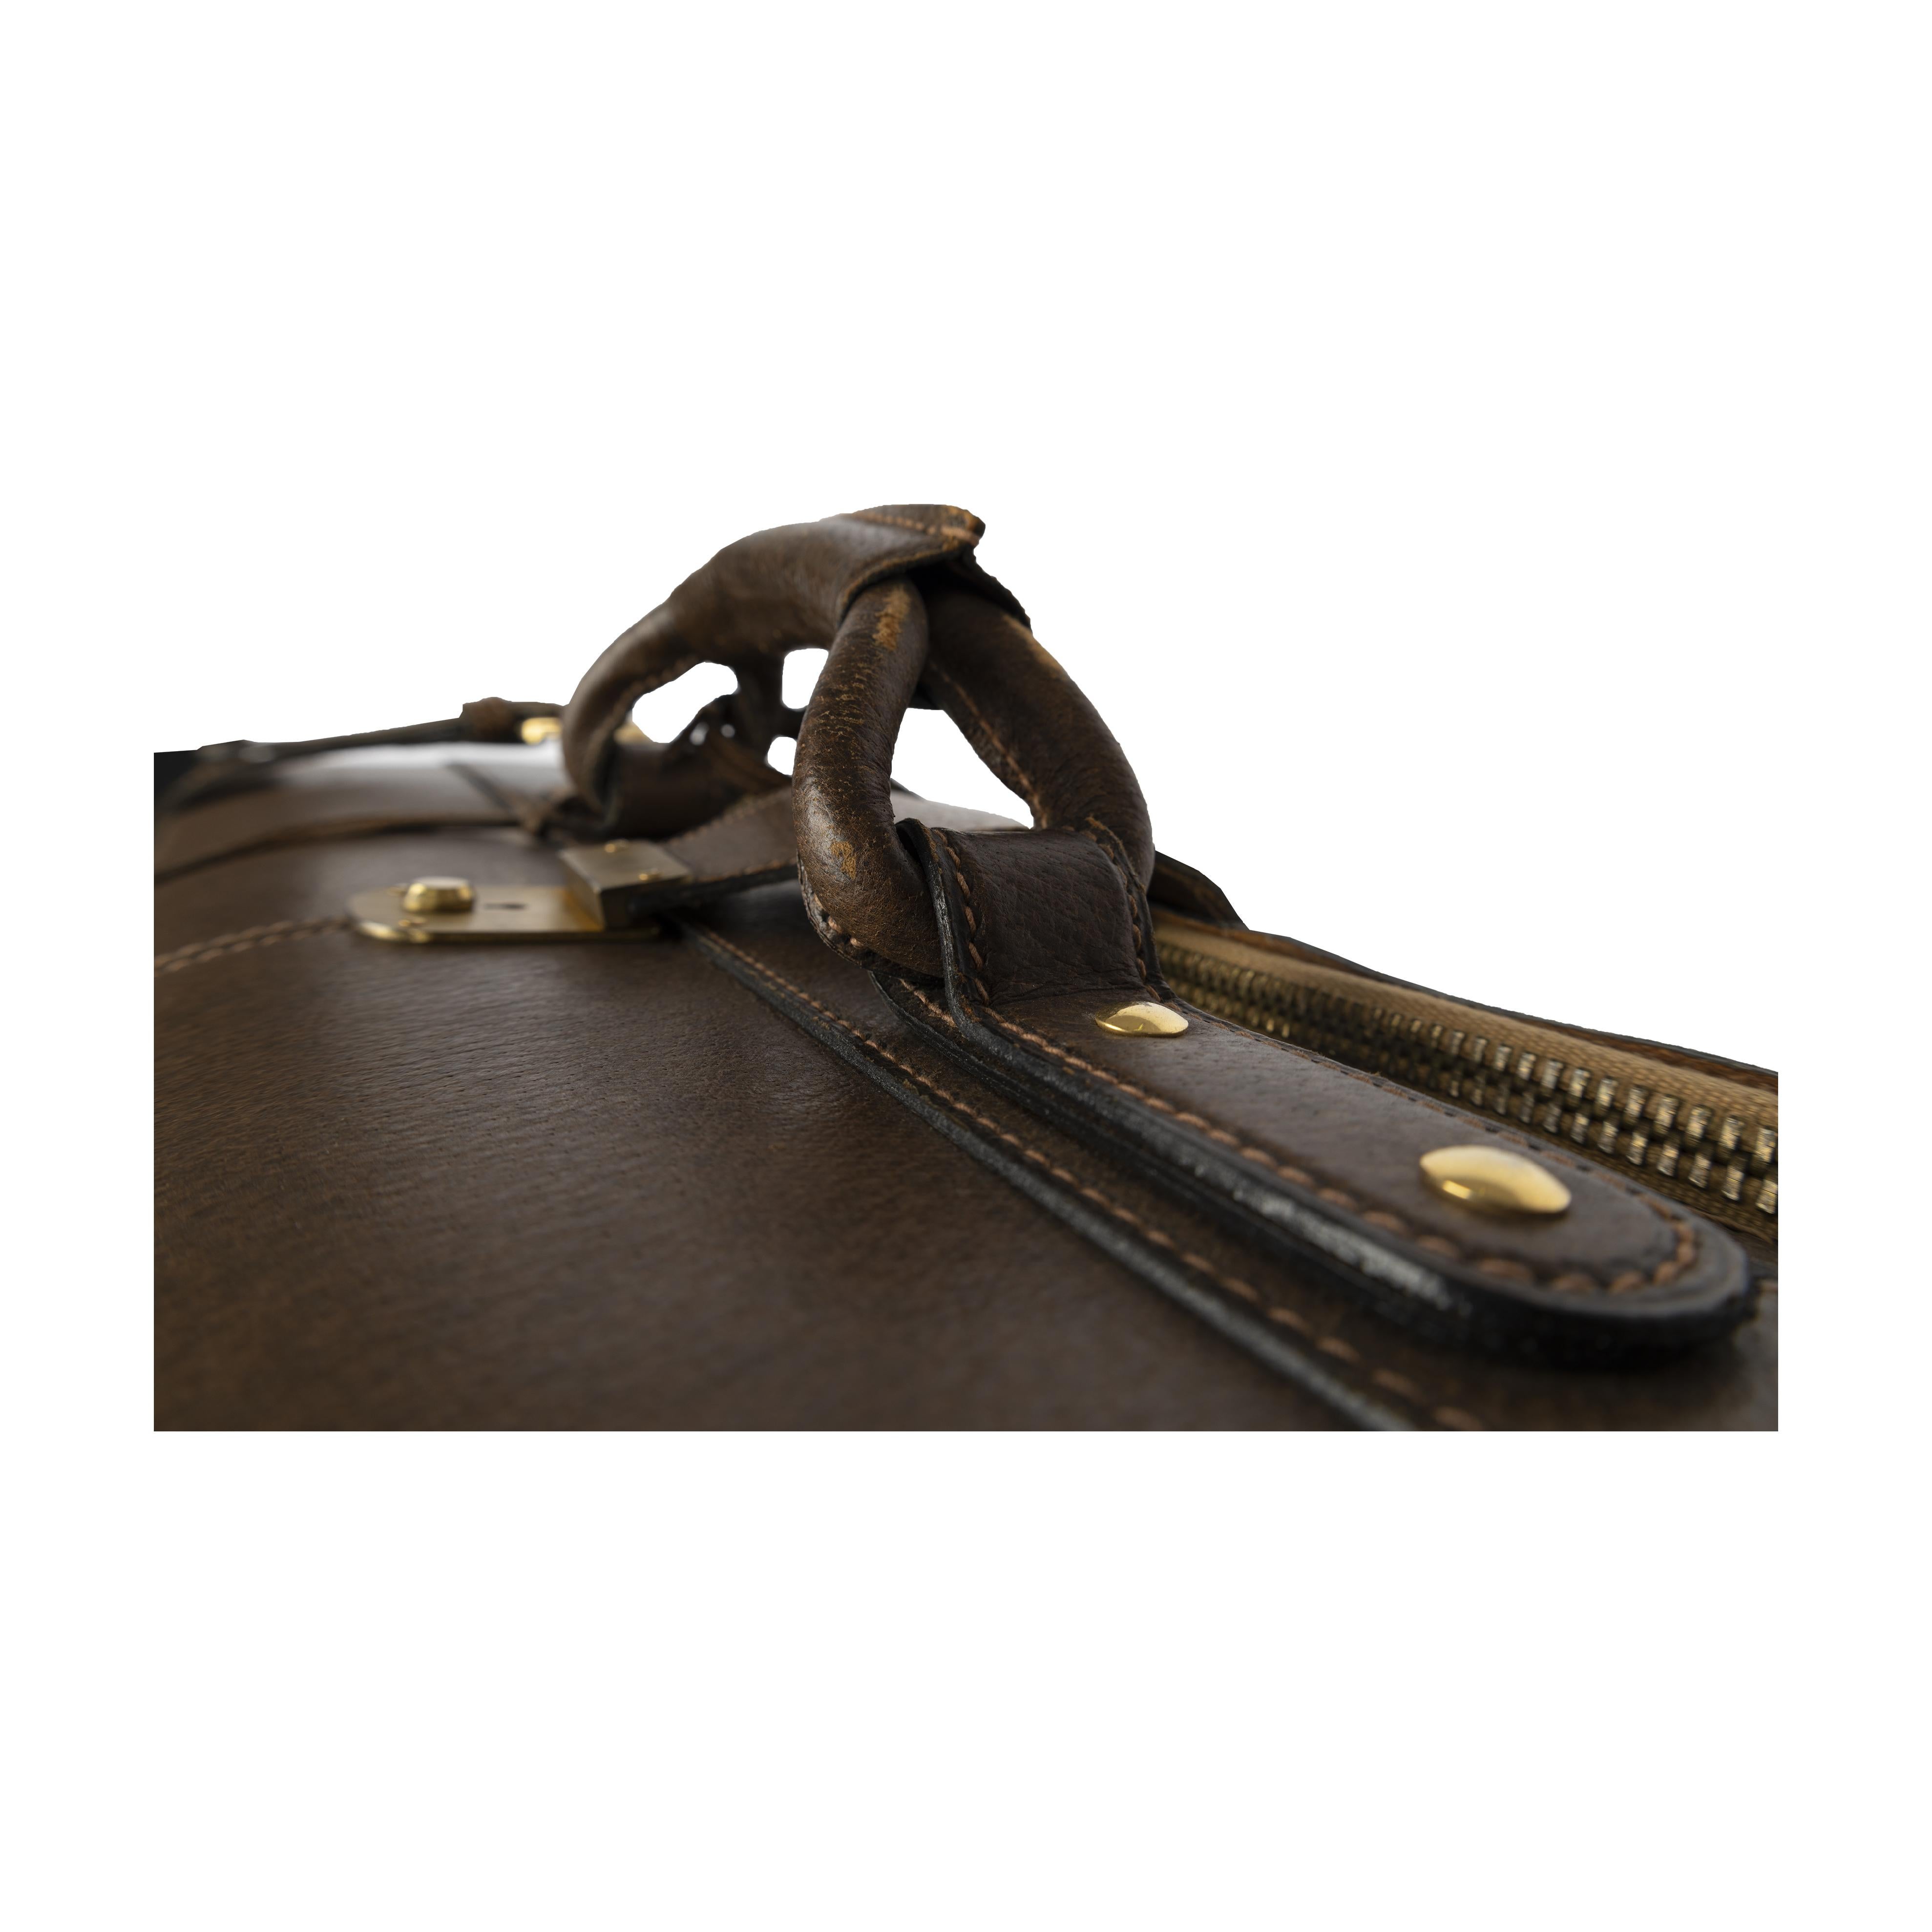 Made in the '70s, this Gucci suitcase is perfect for long stays. With brown suede with the Gucci red and green panels, the handle and area around the main zipper are crafted in leather. It also features an inner pocket to store smaller essentials.